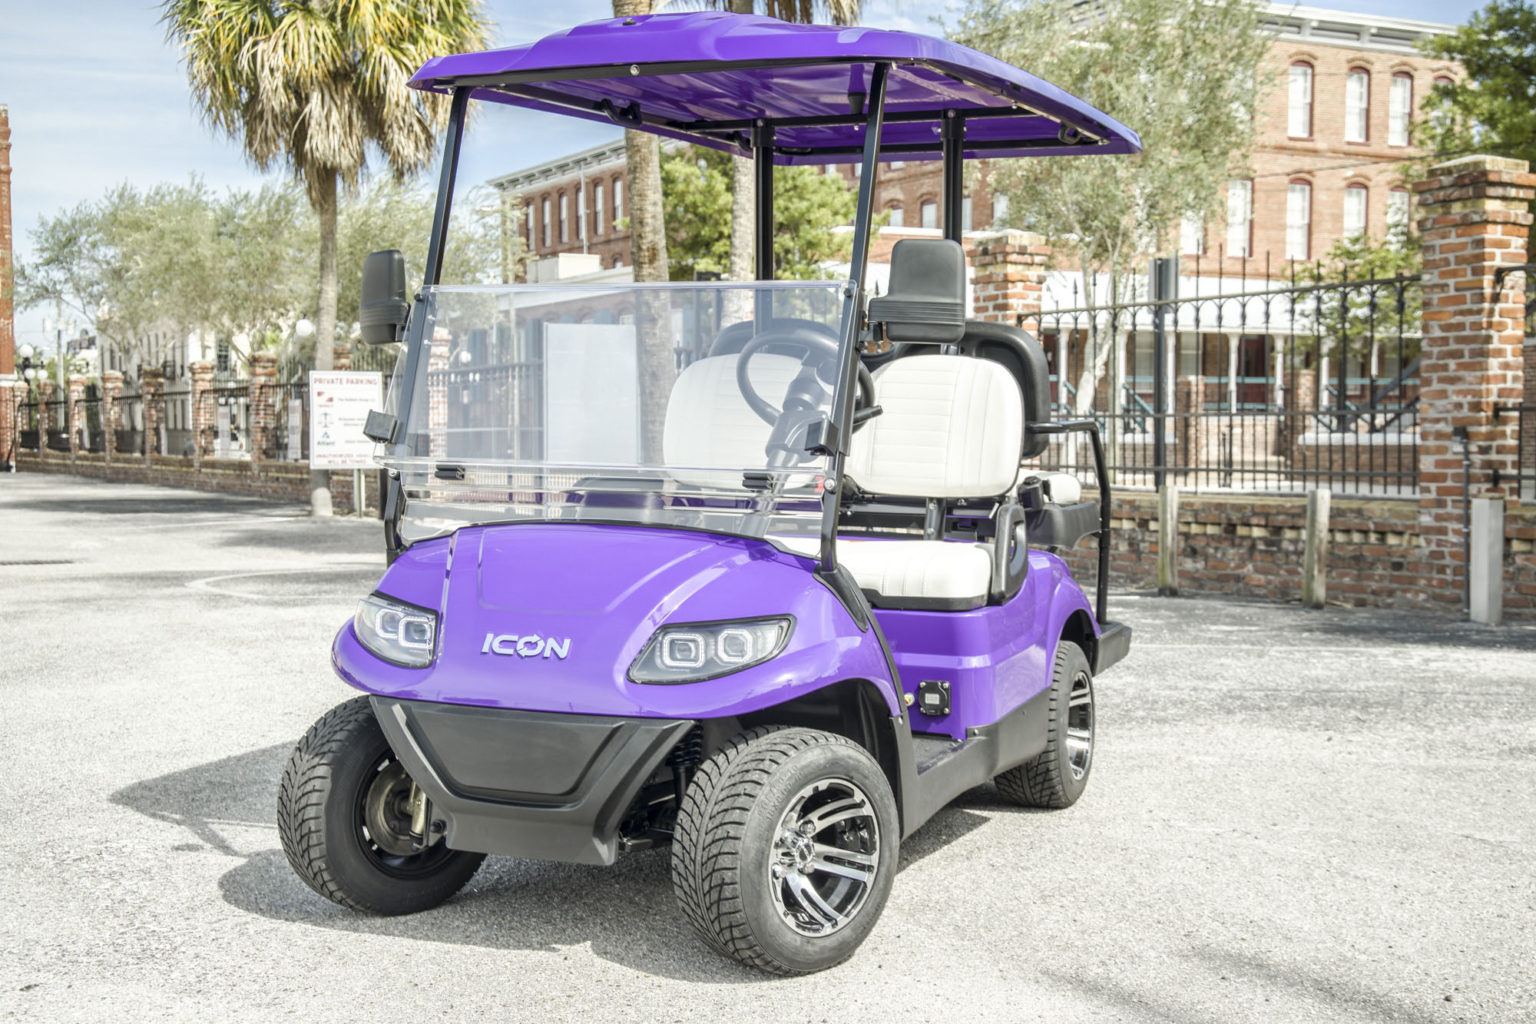 Icon Golf Carts for Sale in Jackson, MS - Southeastern Carts ...